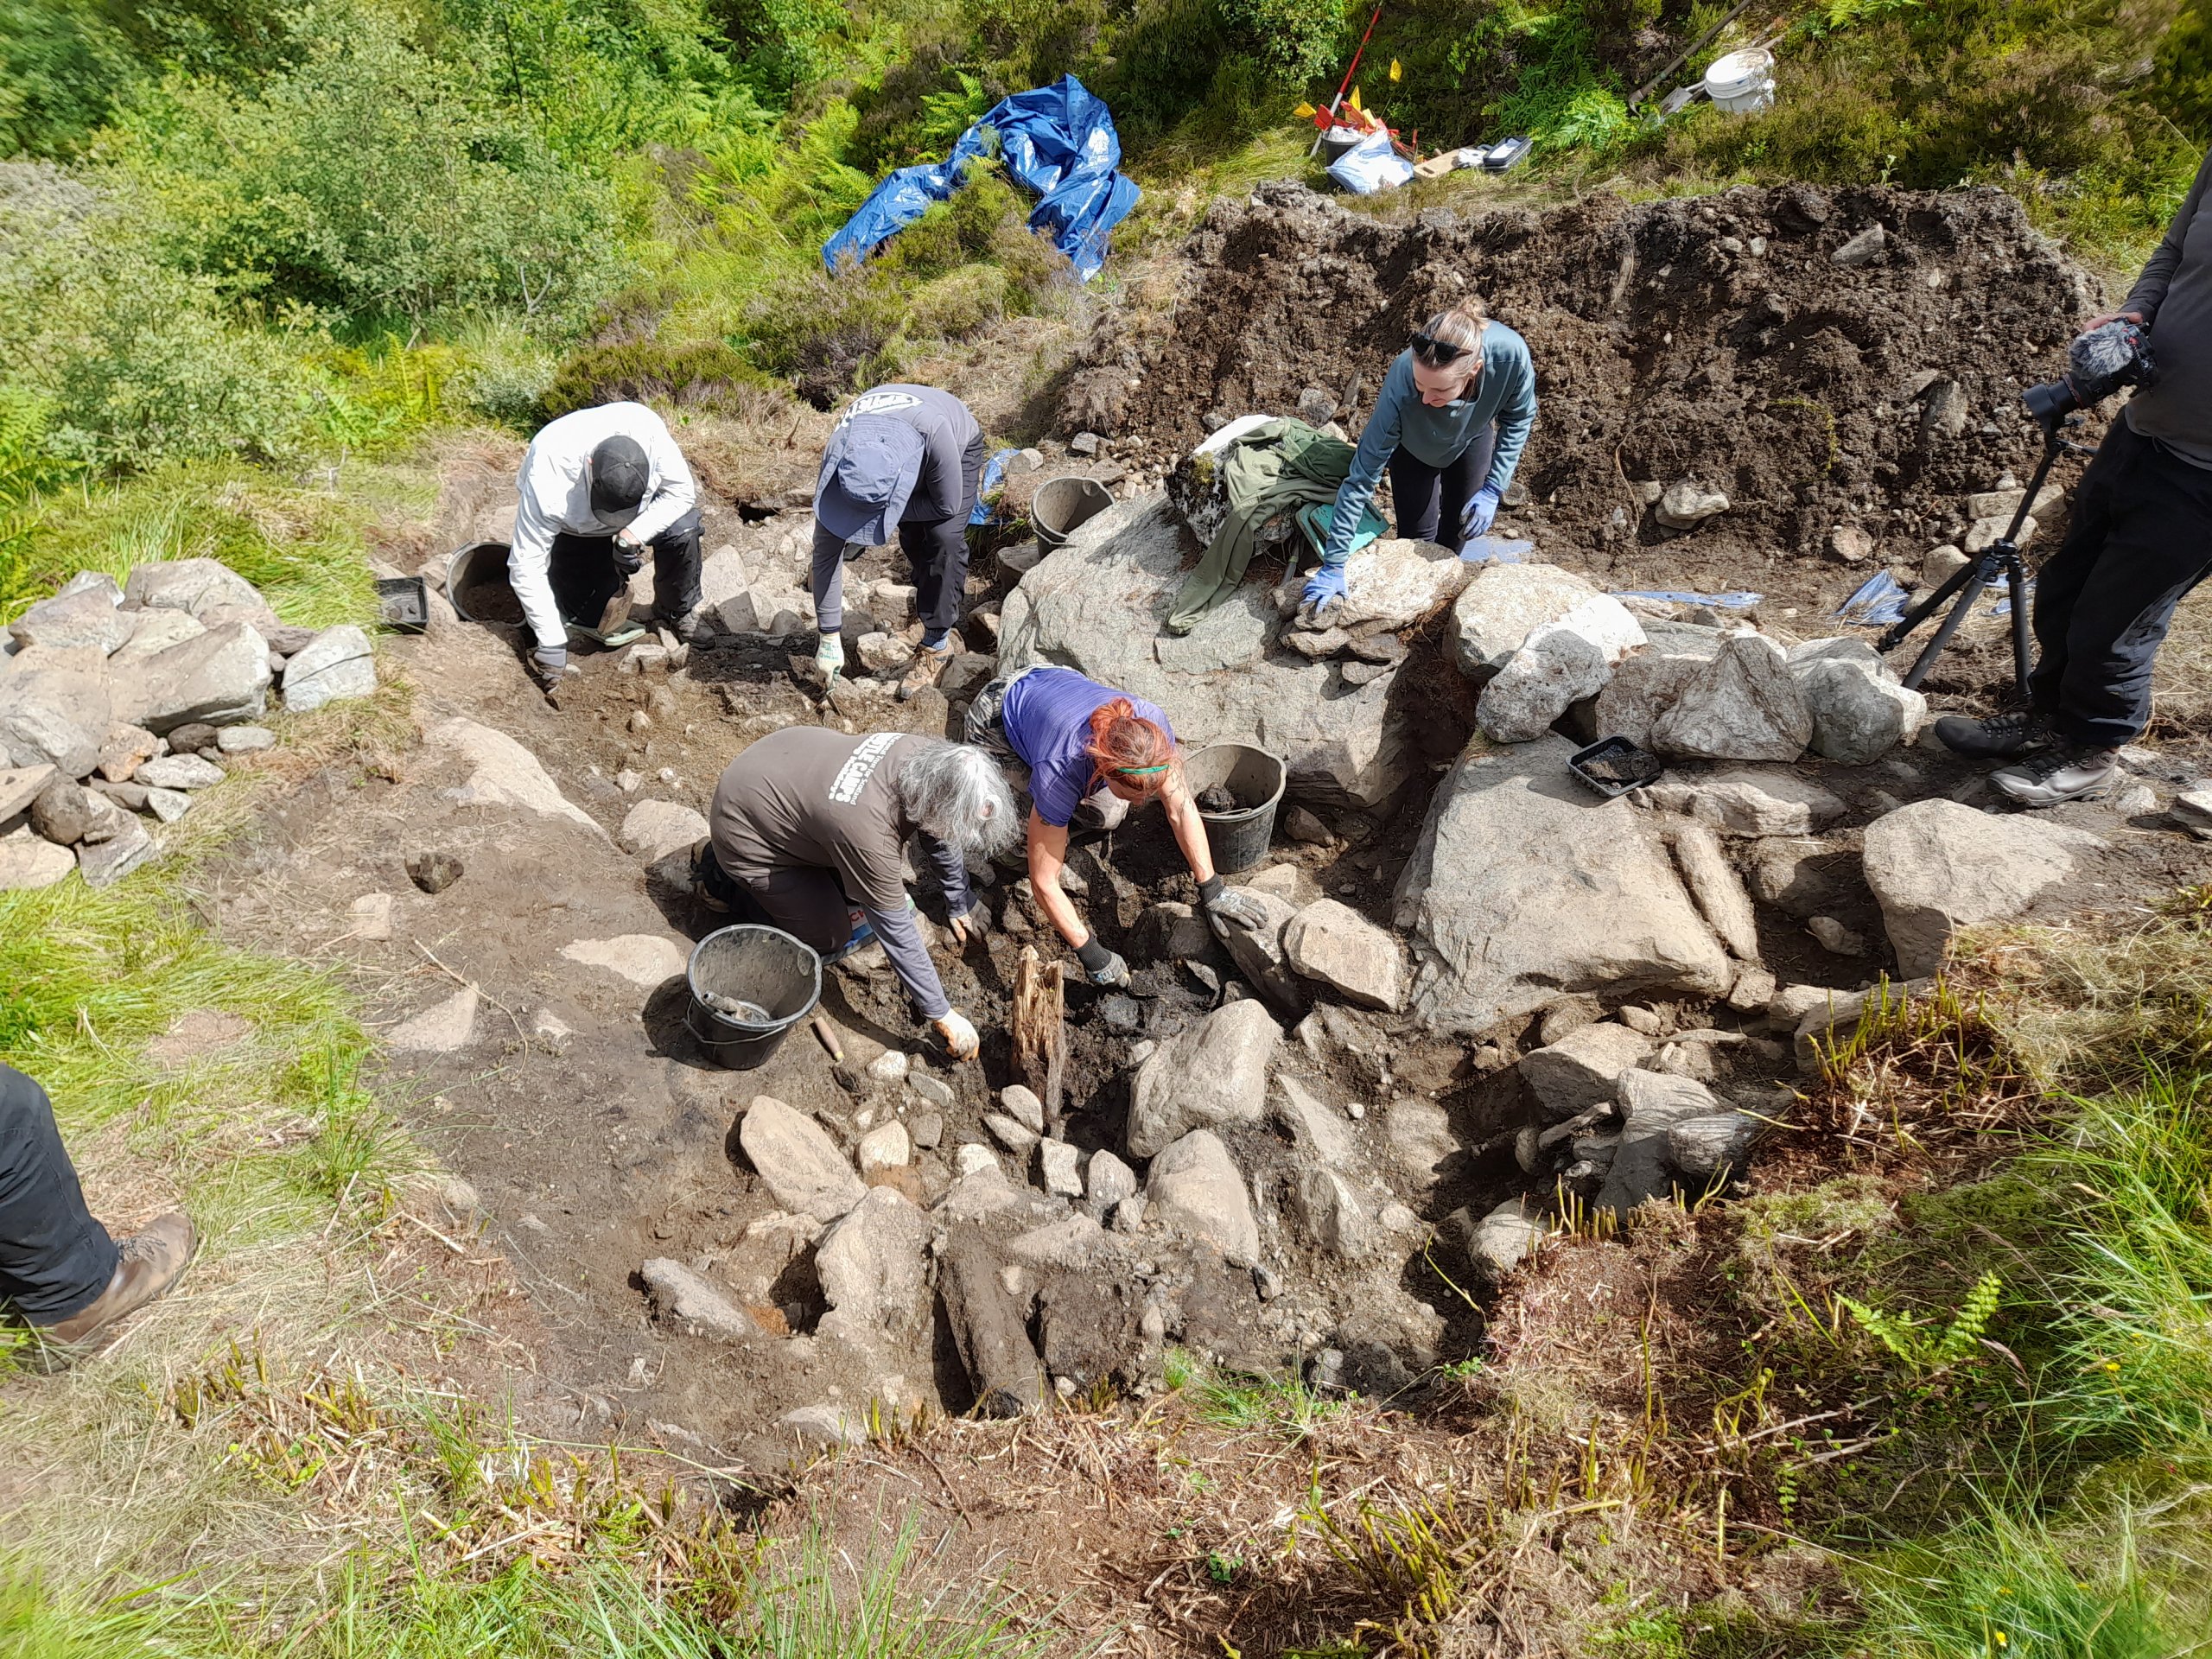 Archaeologists dig into a bothy site at Ben Lowers. Image courtesy National Trust for Scotland.